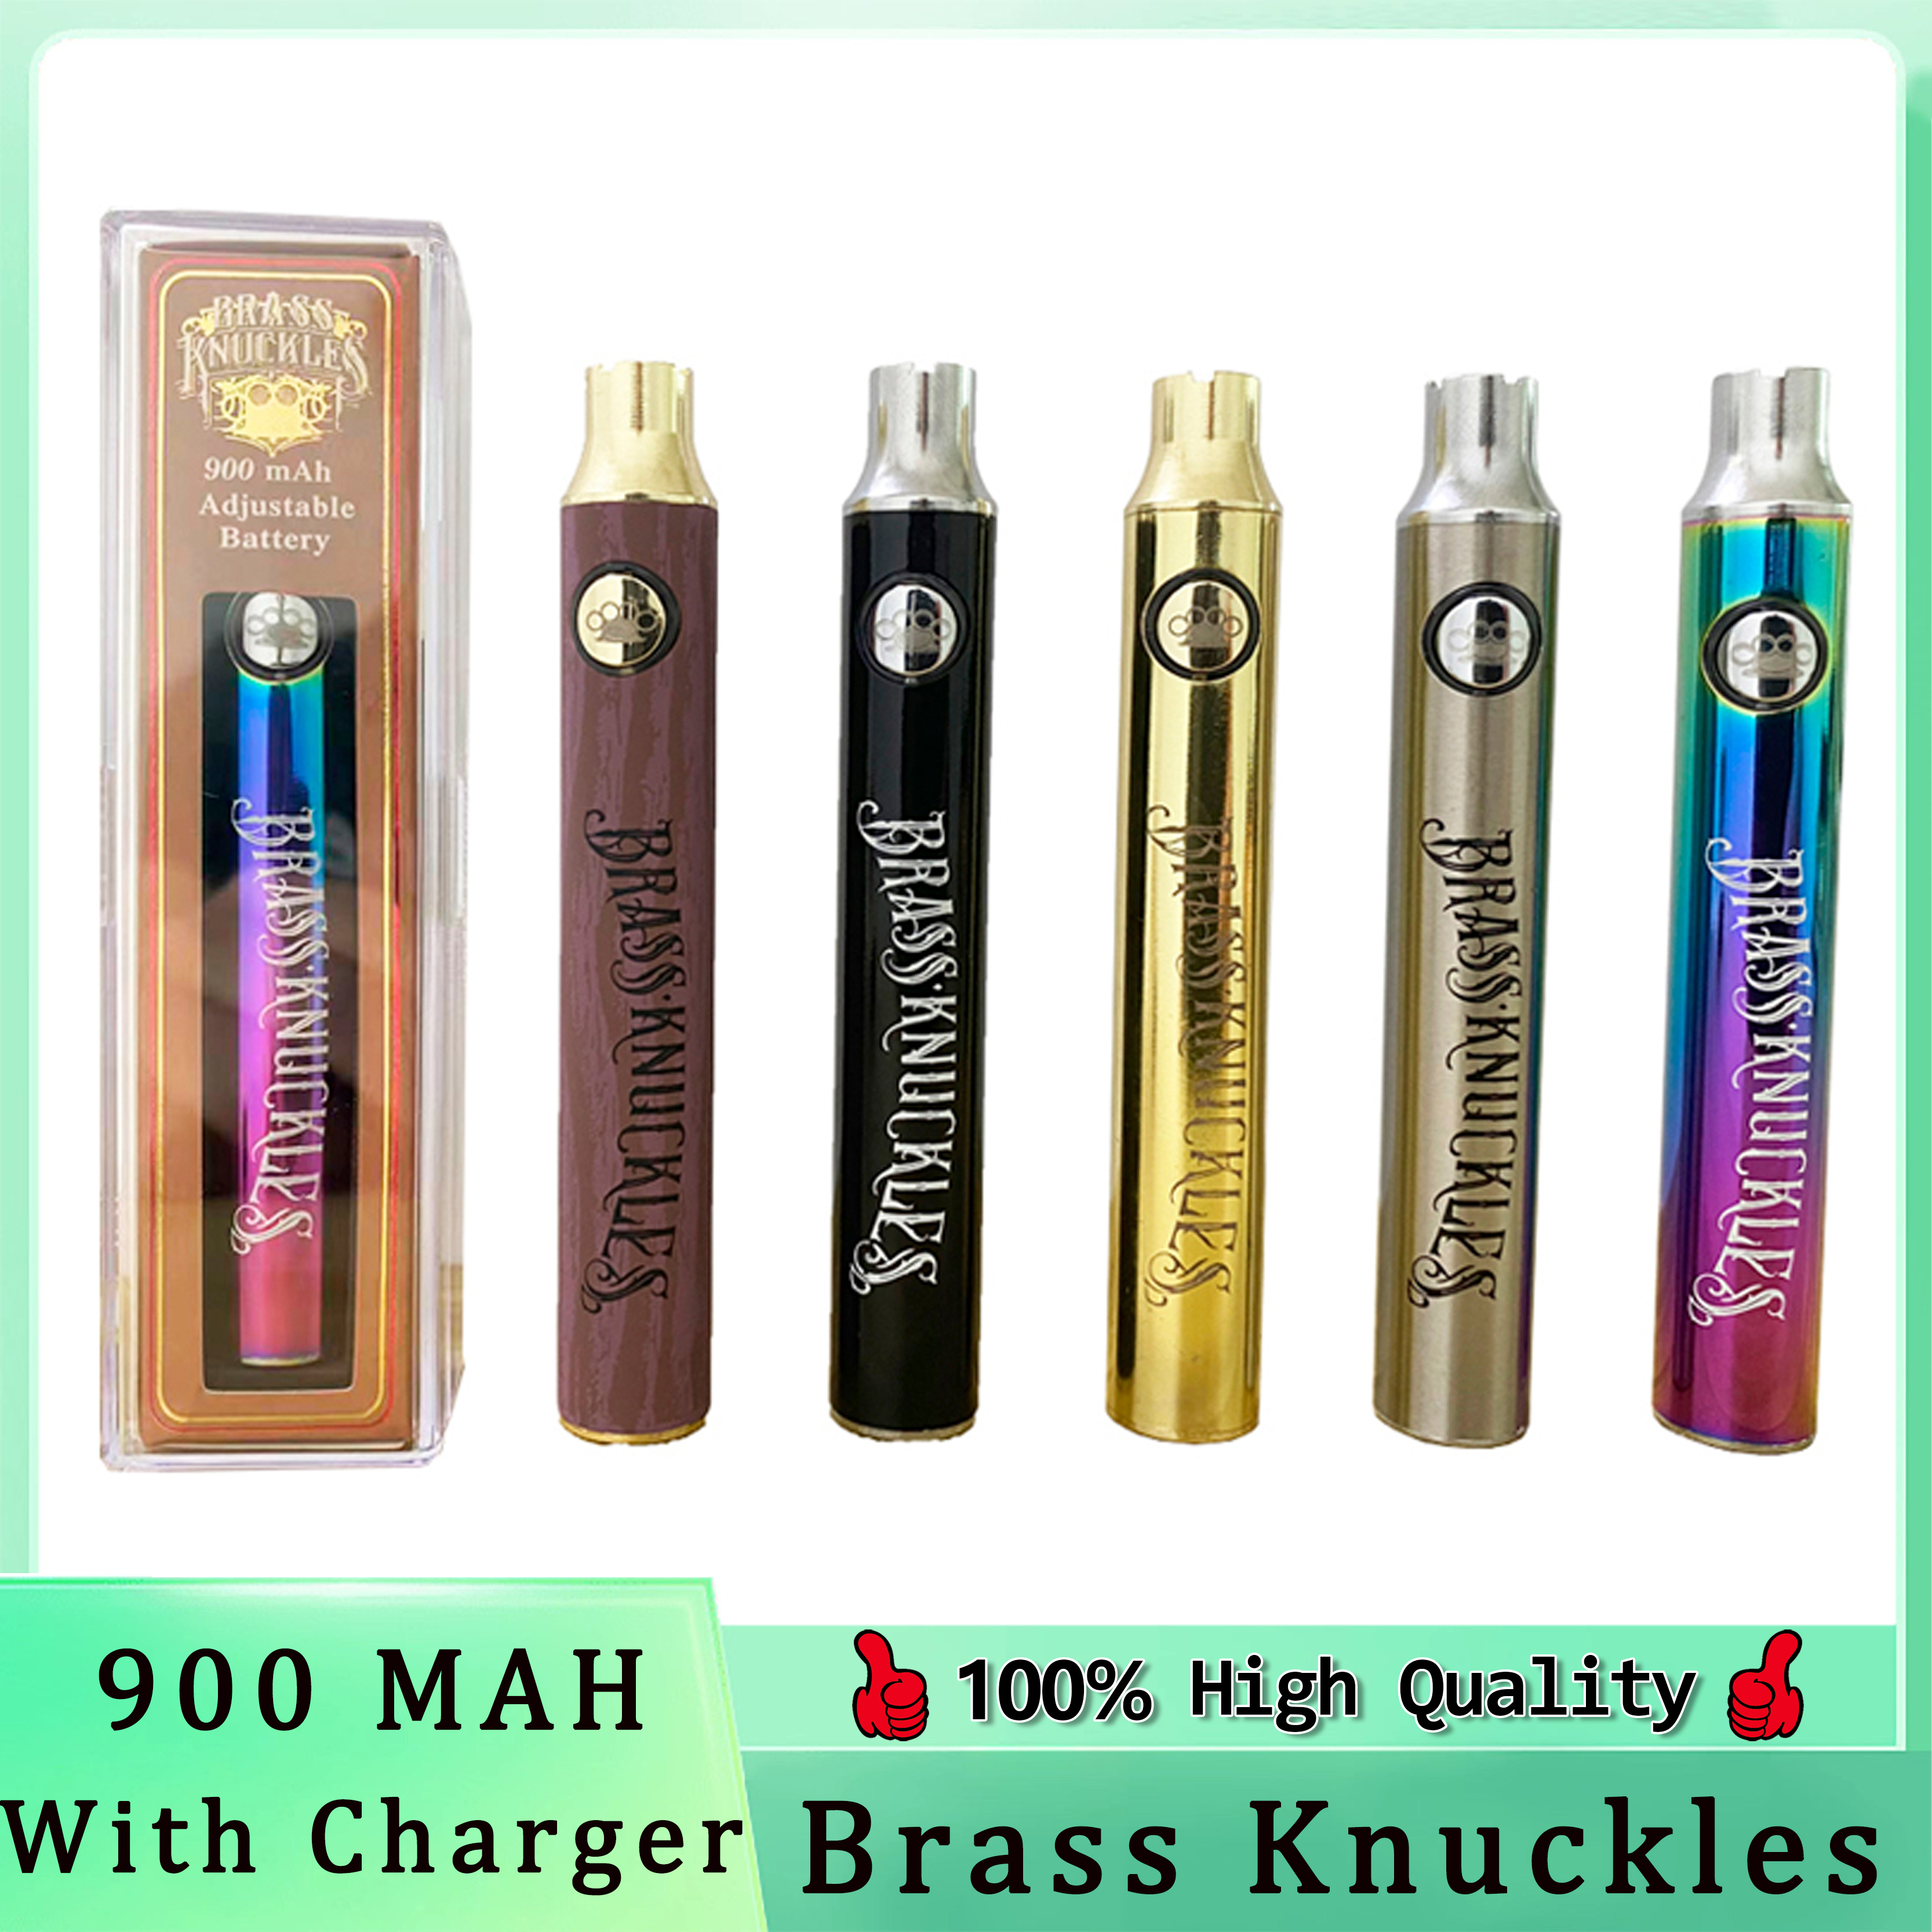 

Brass Knuckles Battery Preheating Variable Voltage 900mAh 5 Colors In Stock E Cig Pen For 510 Thraed Thick Oil Cartridge Vs Vision Spinner Law Vertex Ego Fast Send